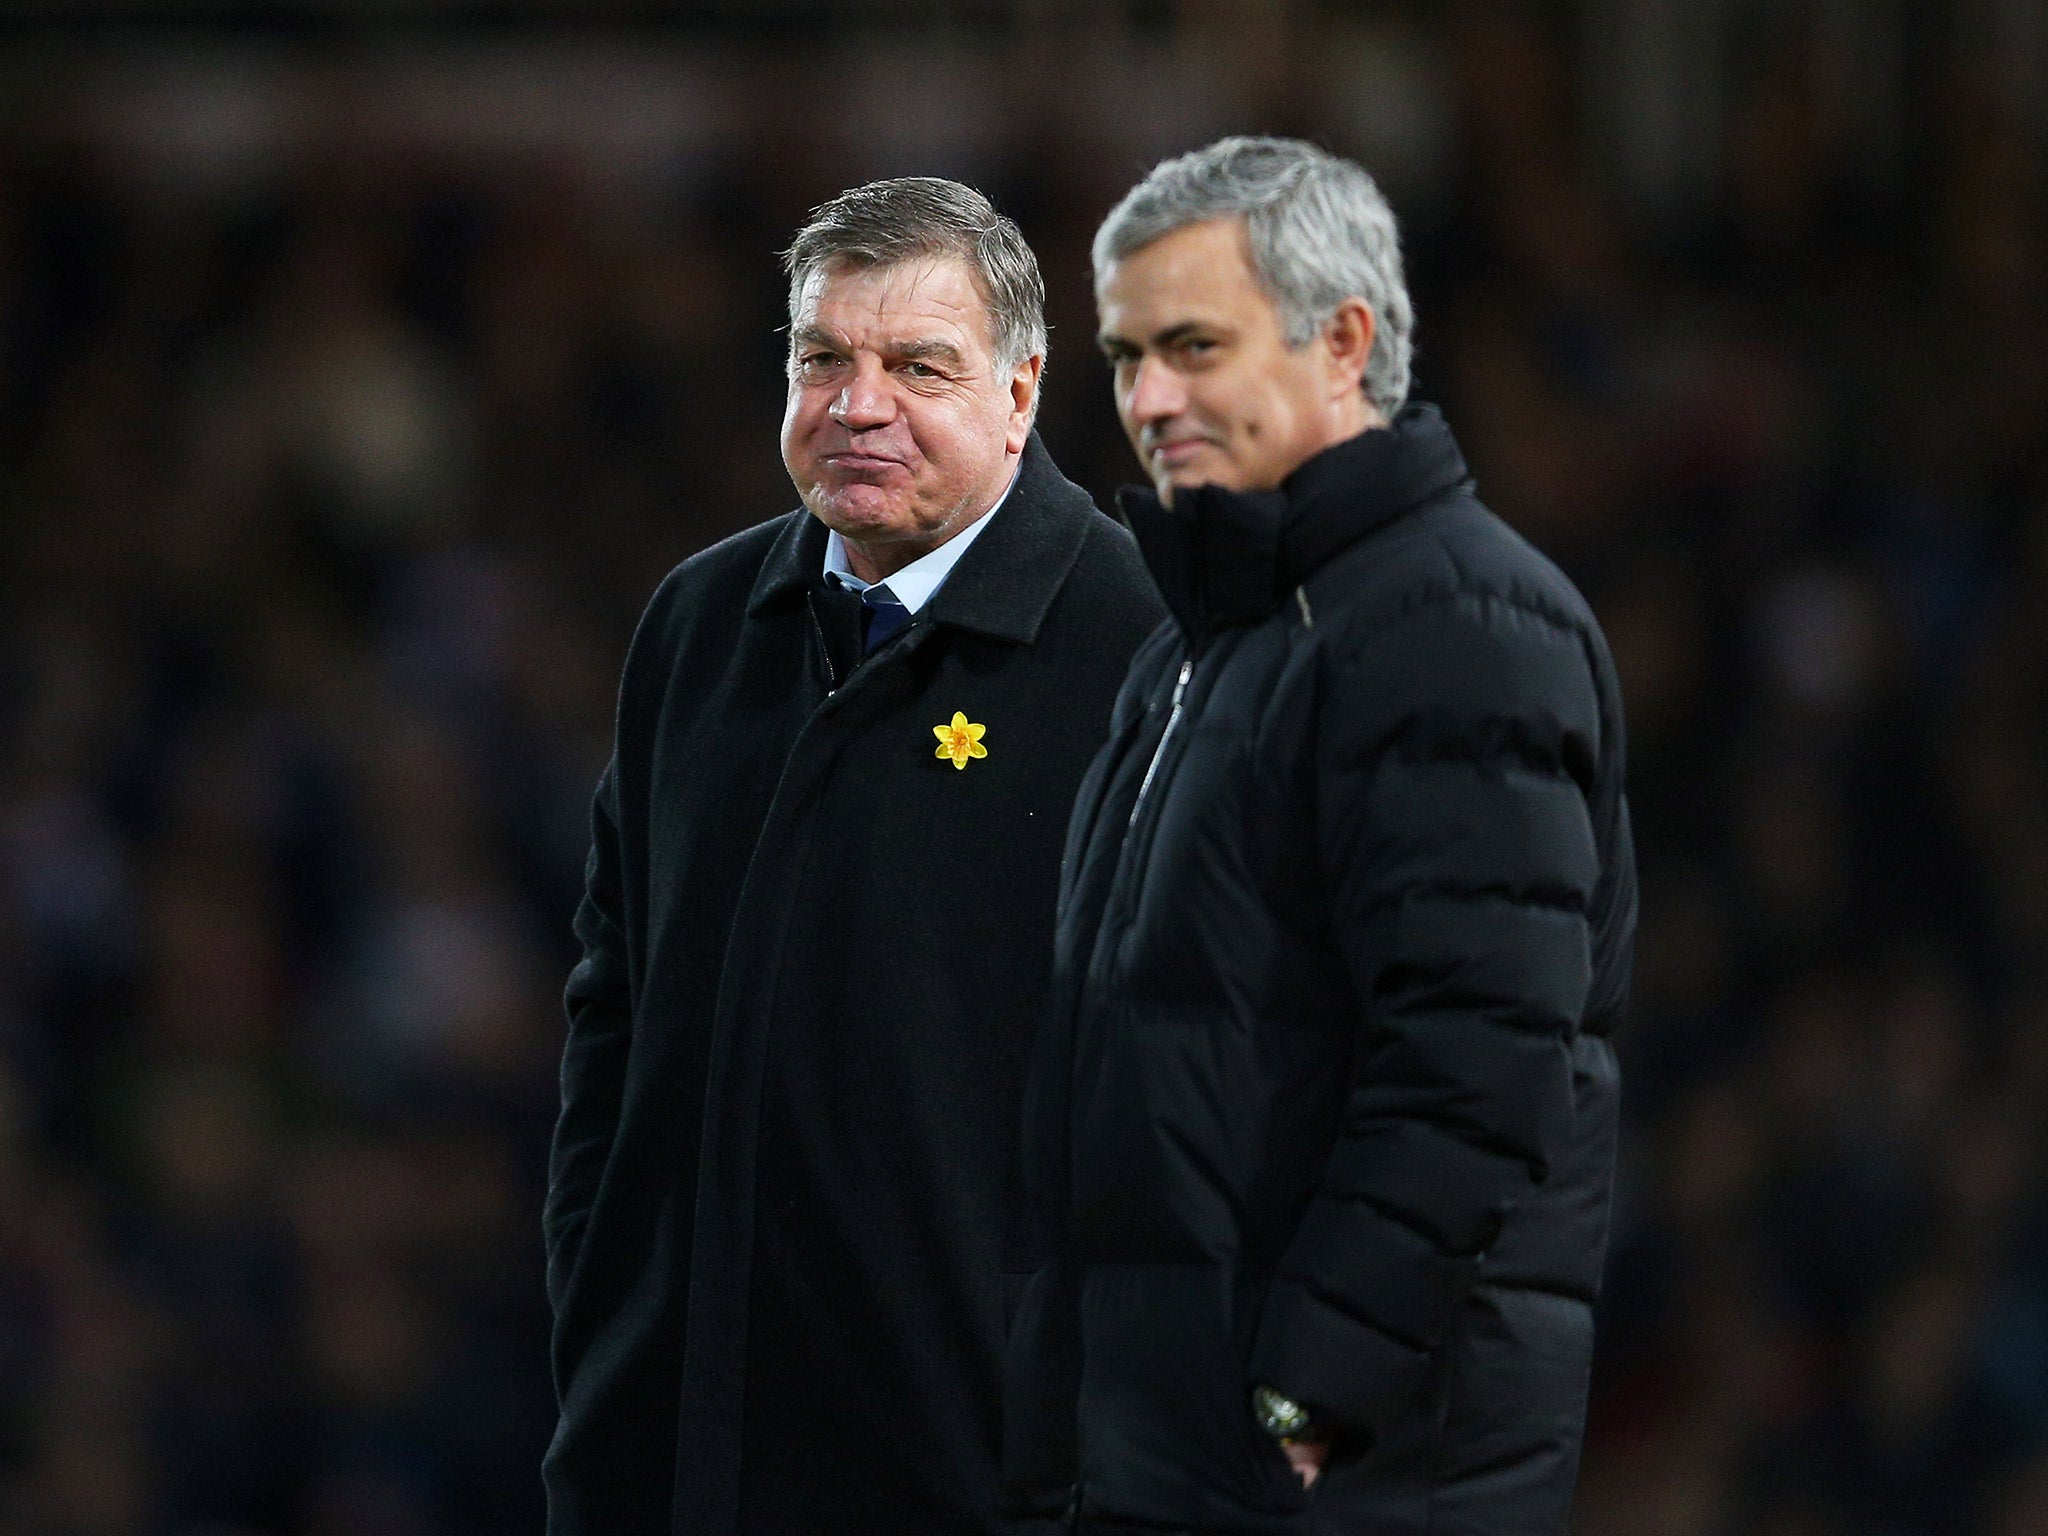 Jose Mourinho has given Sam Allardyce his seal of approval as England manager